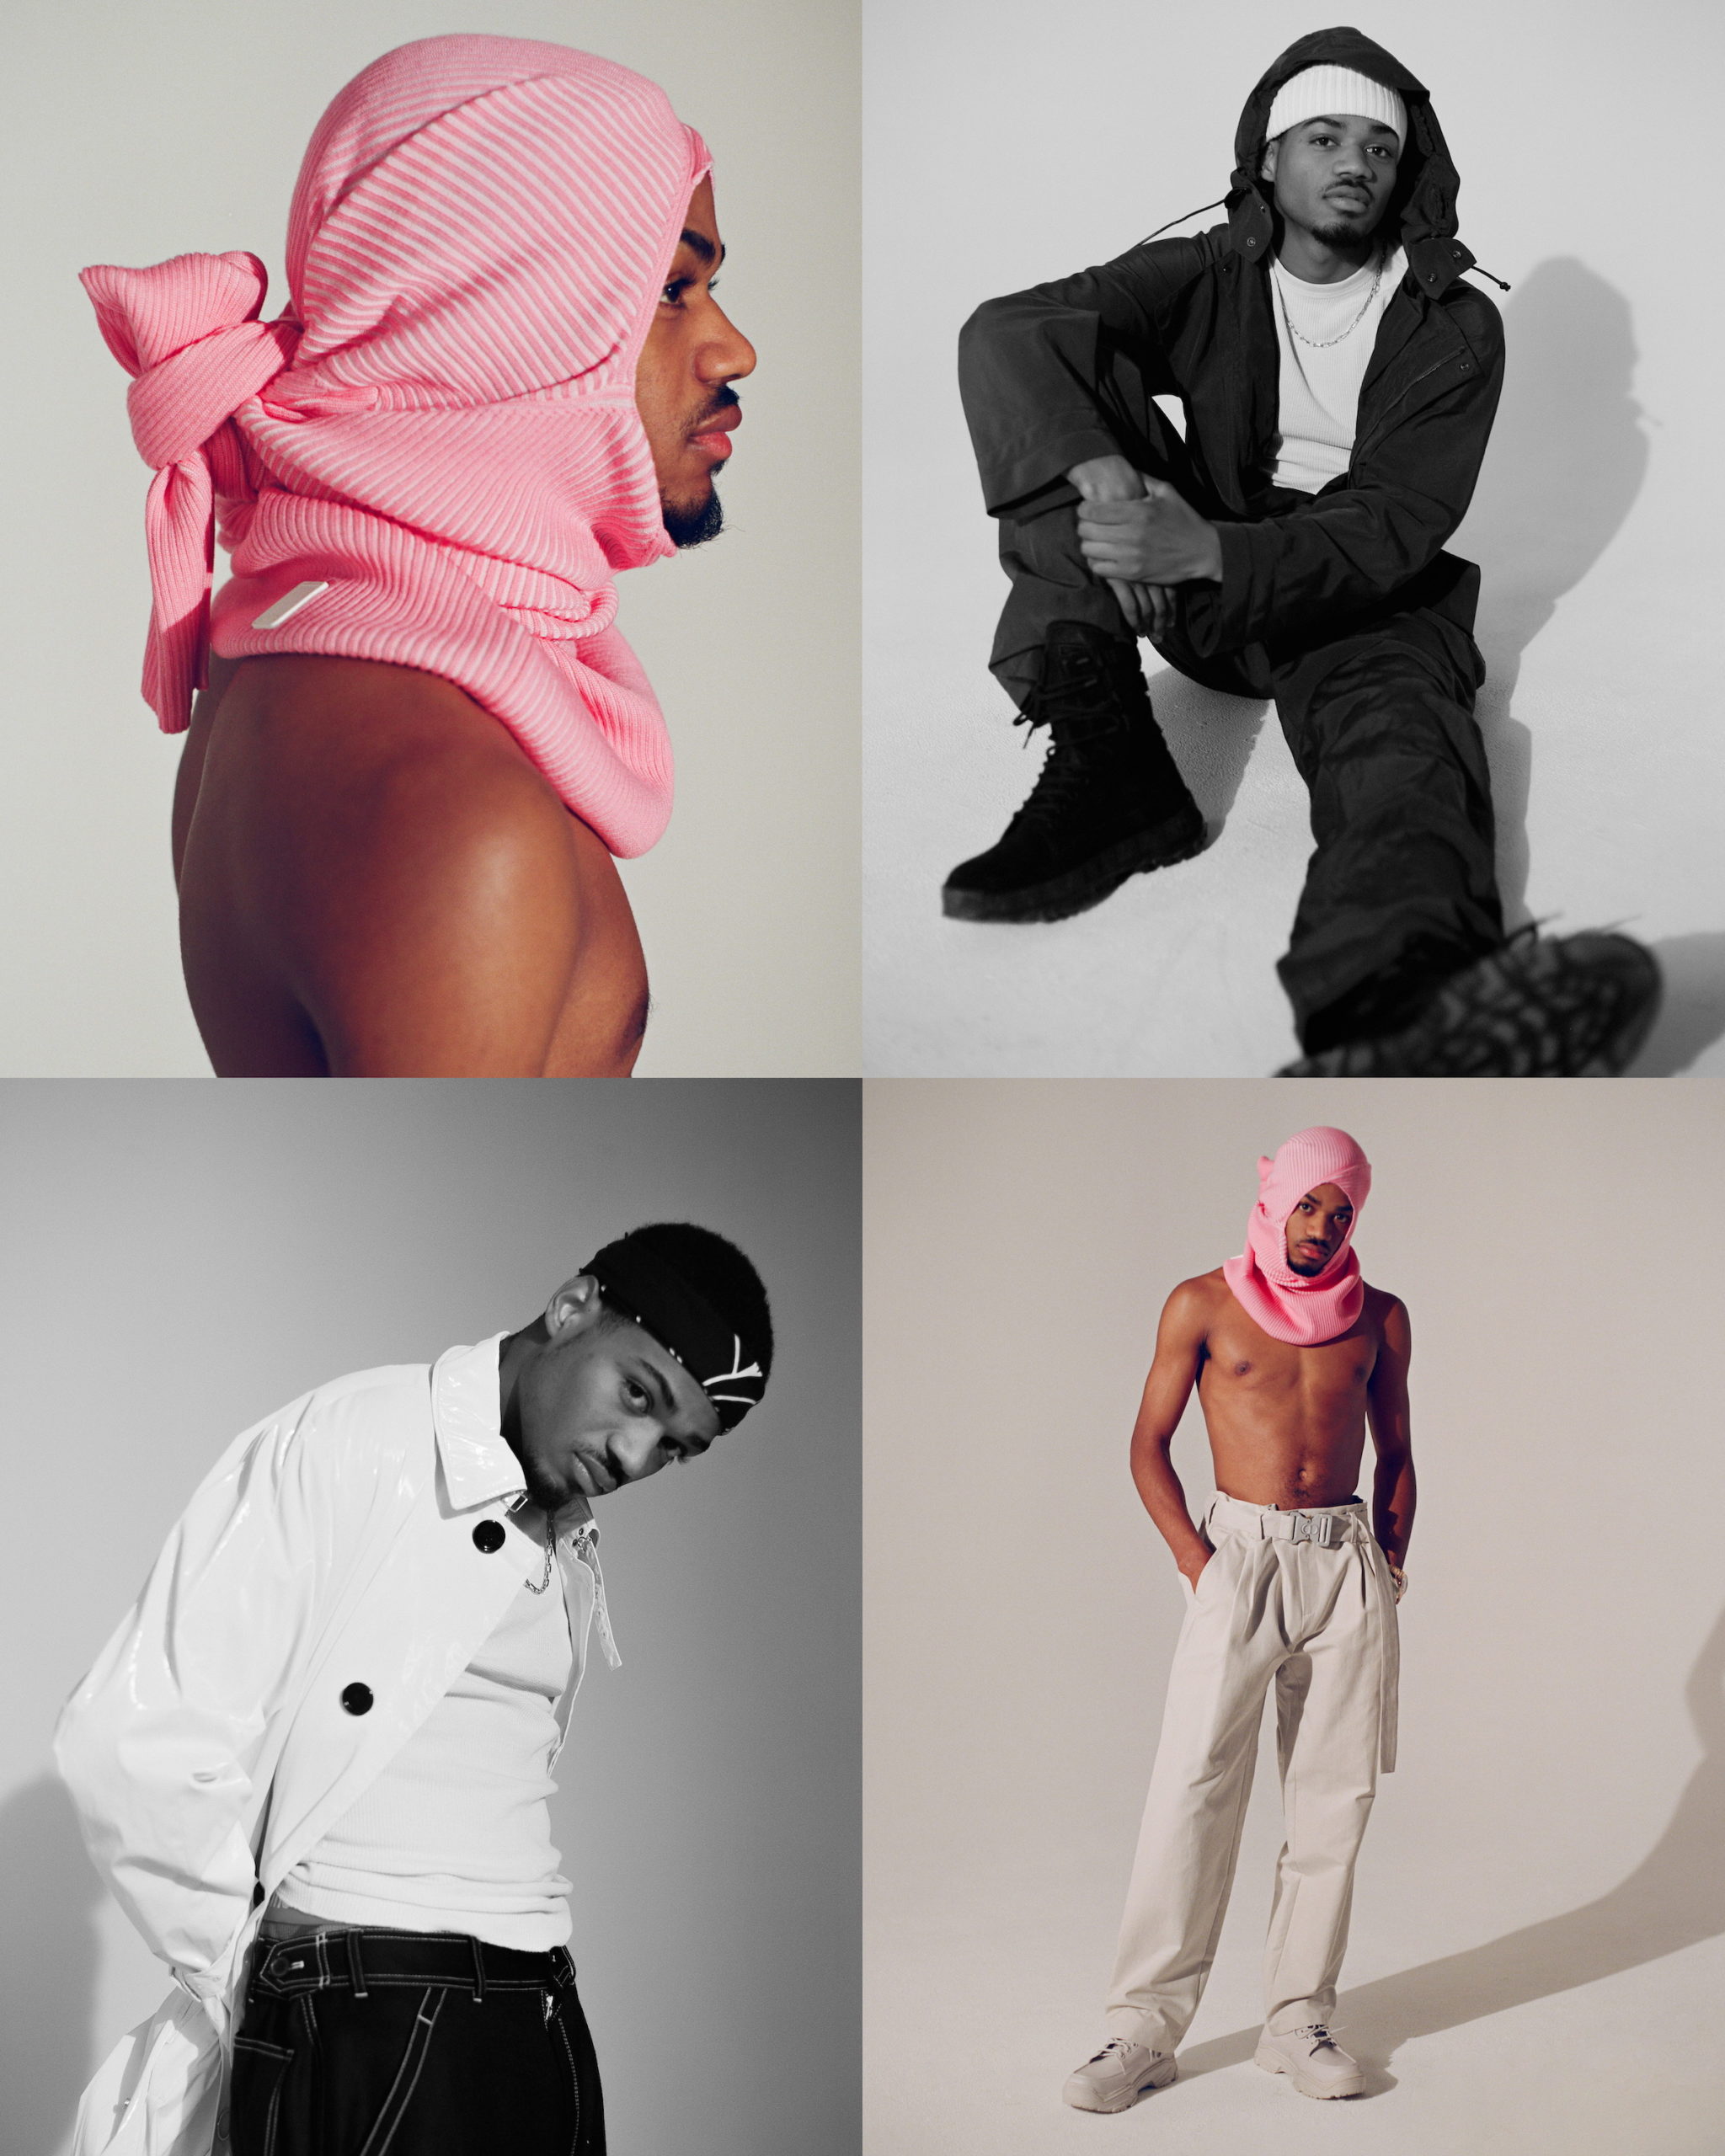  [Top Left & Bottom Right] Tyshawn wears all clothing and accessories Dior [Top Right] Tyshawn wears jumpsuit Ferragamo / necklace Cartier / shoes Versace / shirt and hat his own [Bottom Left] Coat Boss / bandana Tommy Hilfiger x Lewis Hamilton / necklace Cartier / pants Comme des garcons / shirt his own